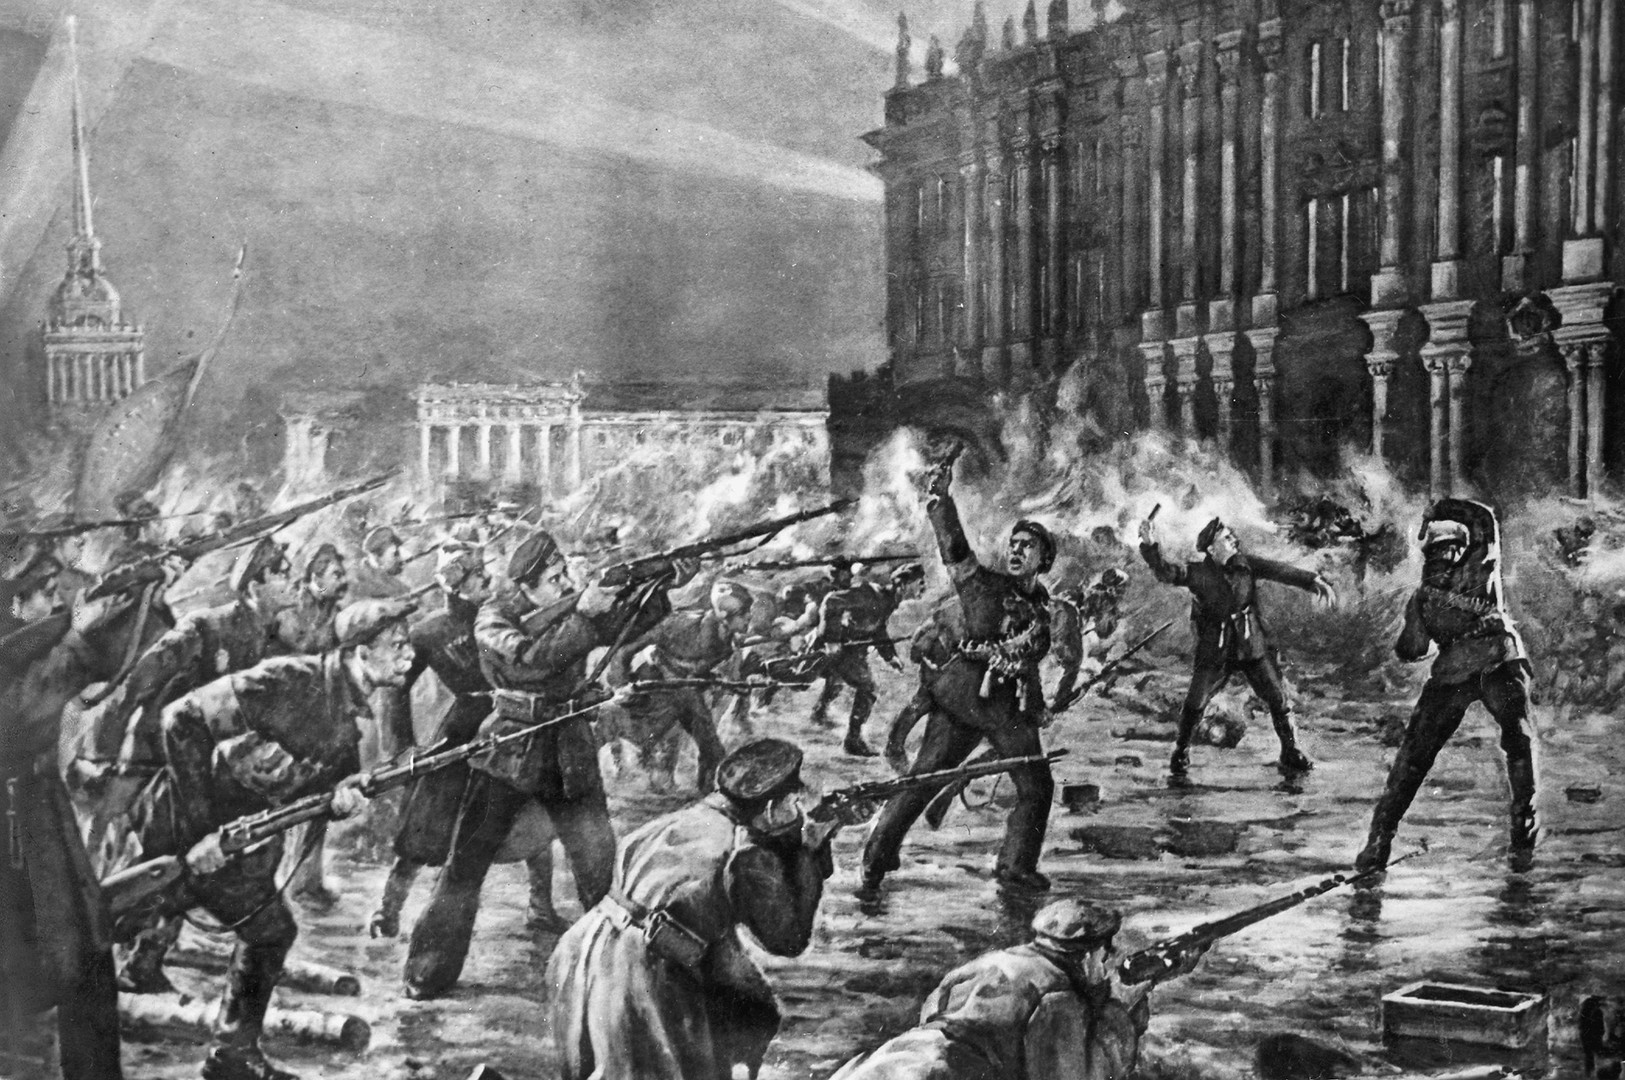 The Red Guards, soldiers and sailors, stormed the former Tsar's palace (Winter Palace) in November 1917.